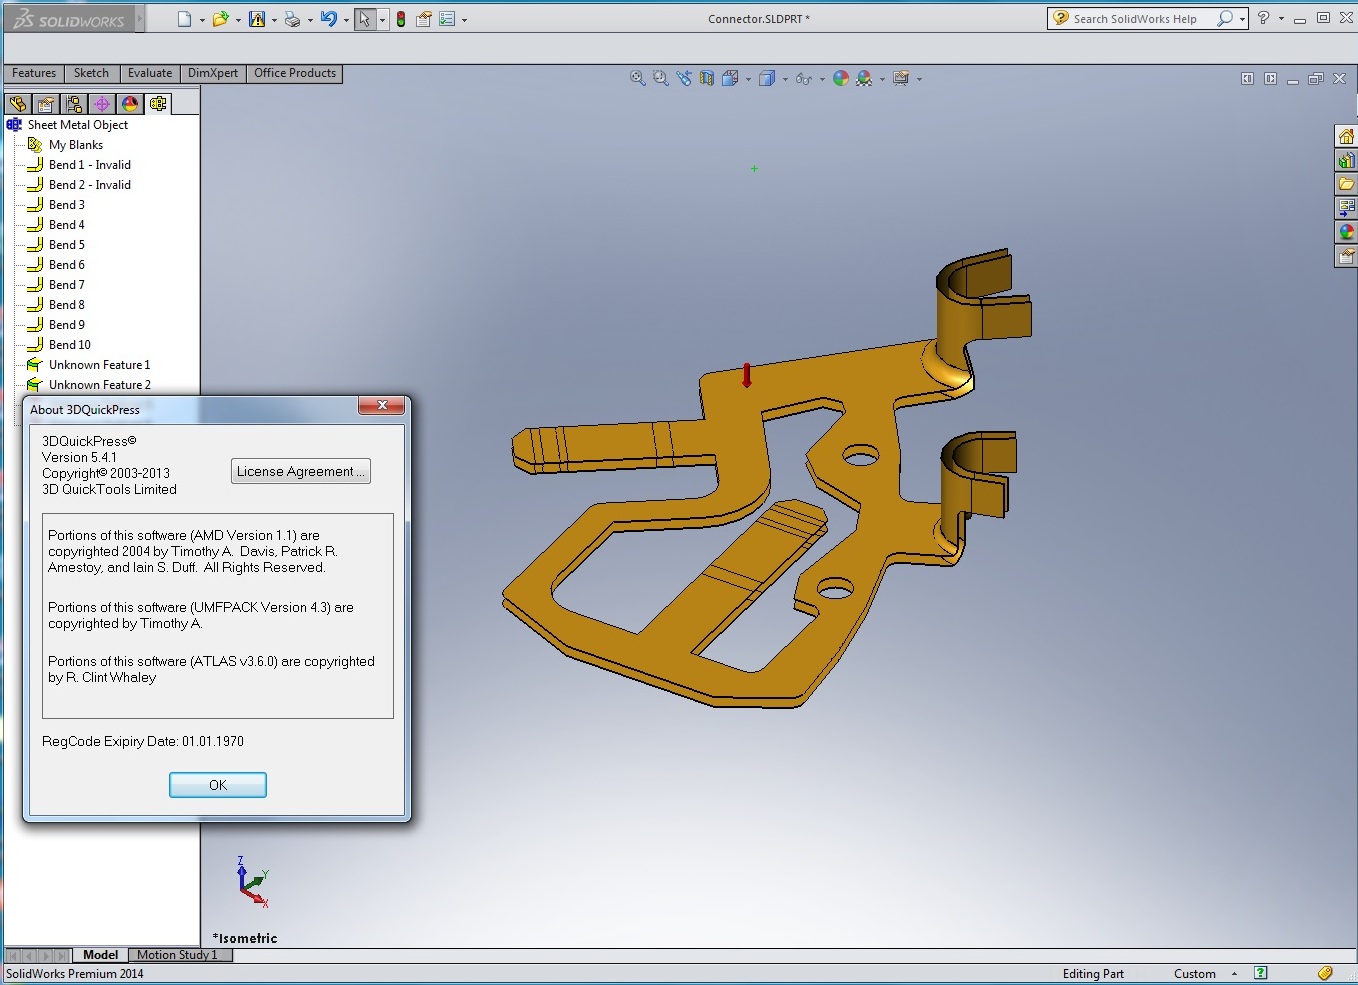 Designing with 3DQuickPress v5.4.1 for SolidWorks 2009-2014 full license